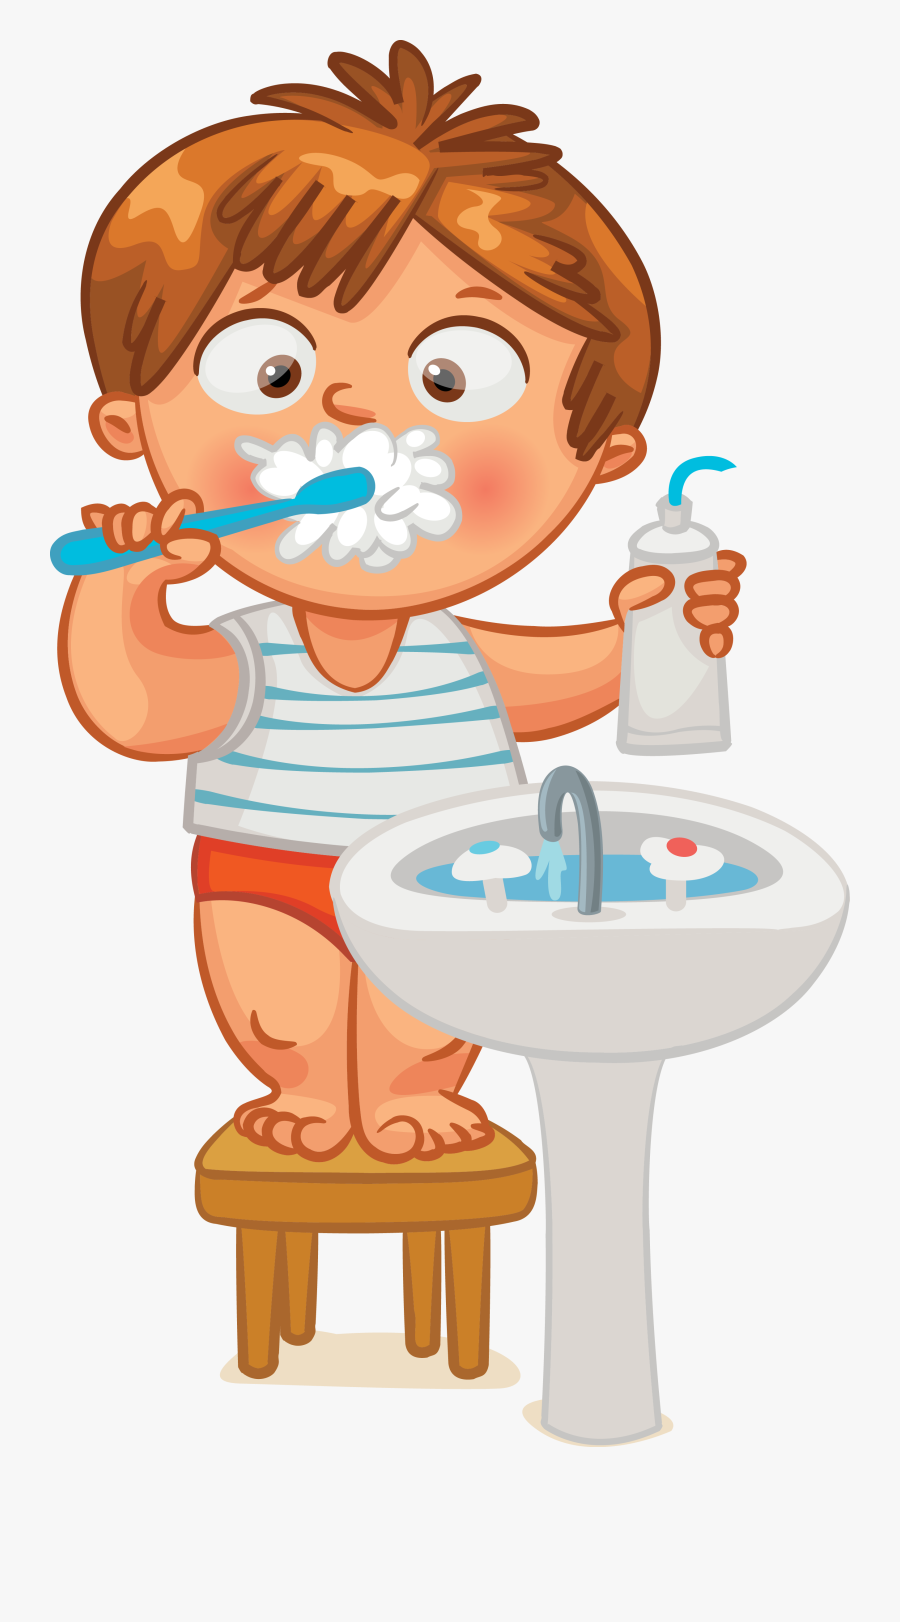 Pe Clipart Everyday - Brush Your Teeth Clipart, Transparent Clipart